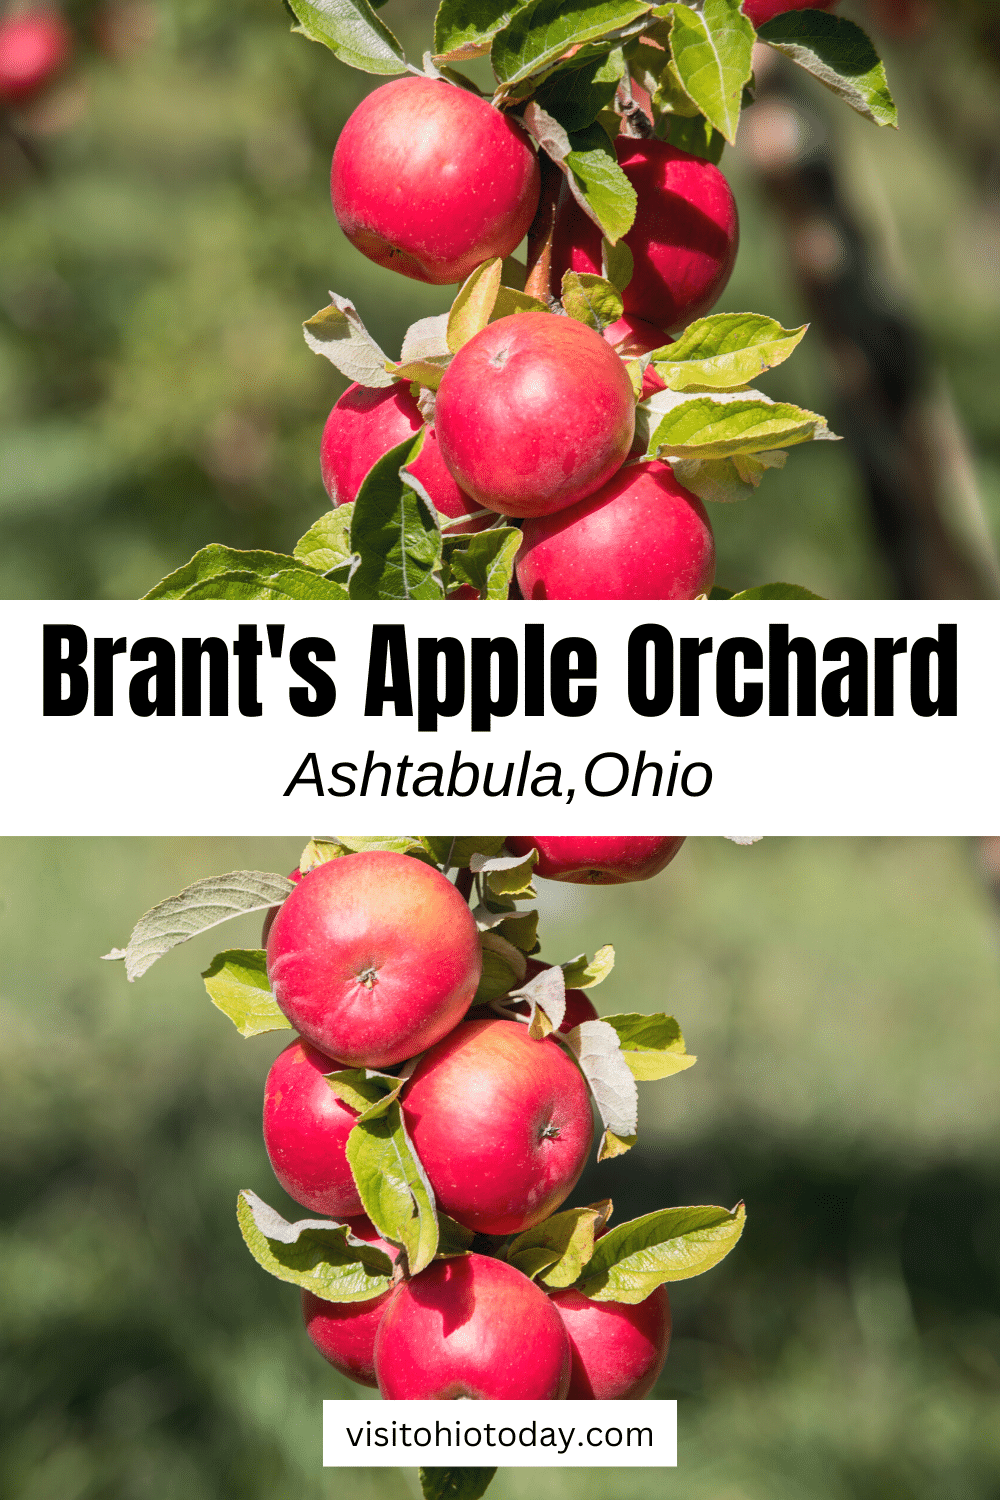 Brant's Apple Orchard is a popular you pick farm in Northeast Ohio. They offer a huge selection of apples, Asian pears and table grapes. Brants Apple Orchard also offers a farm market as well as fun activities during the season for the whole family. | Apple Orchard | Ohio Apples |